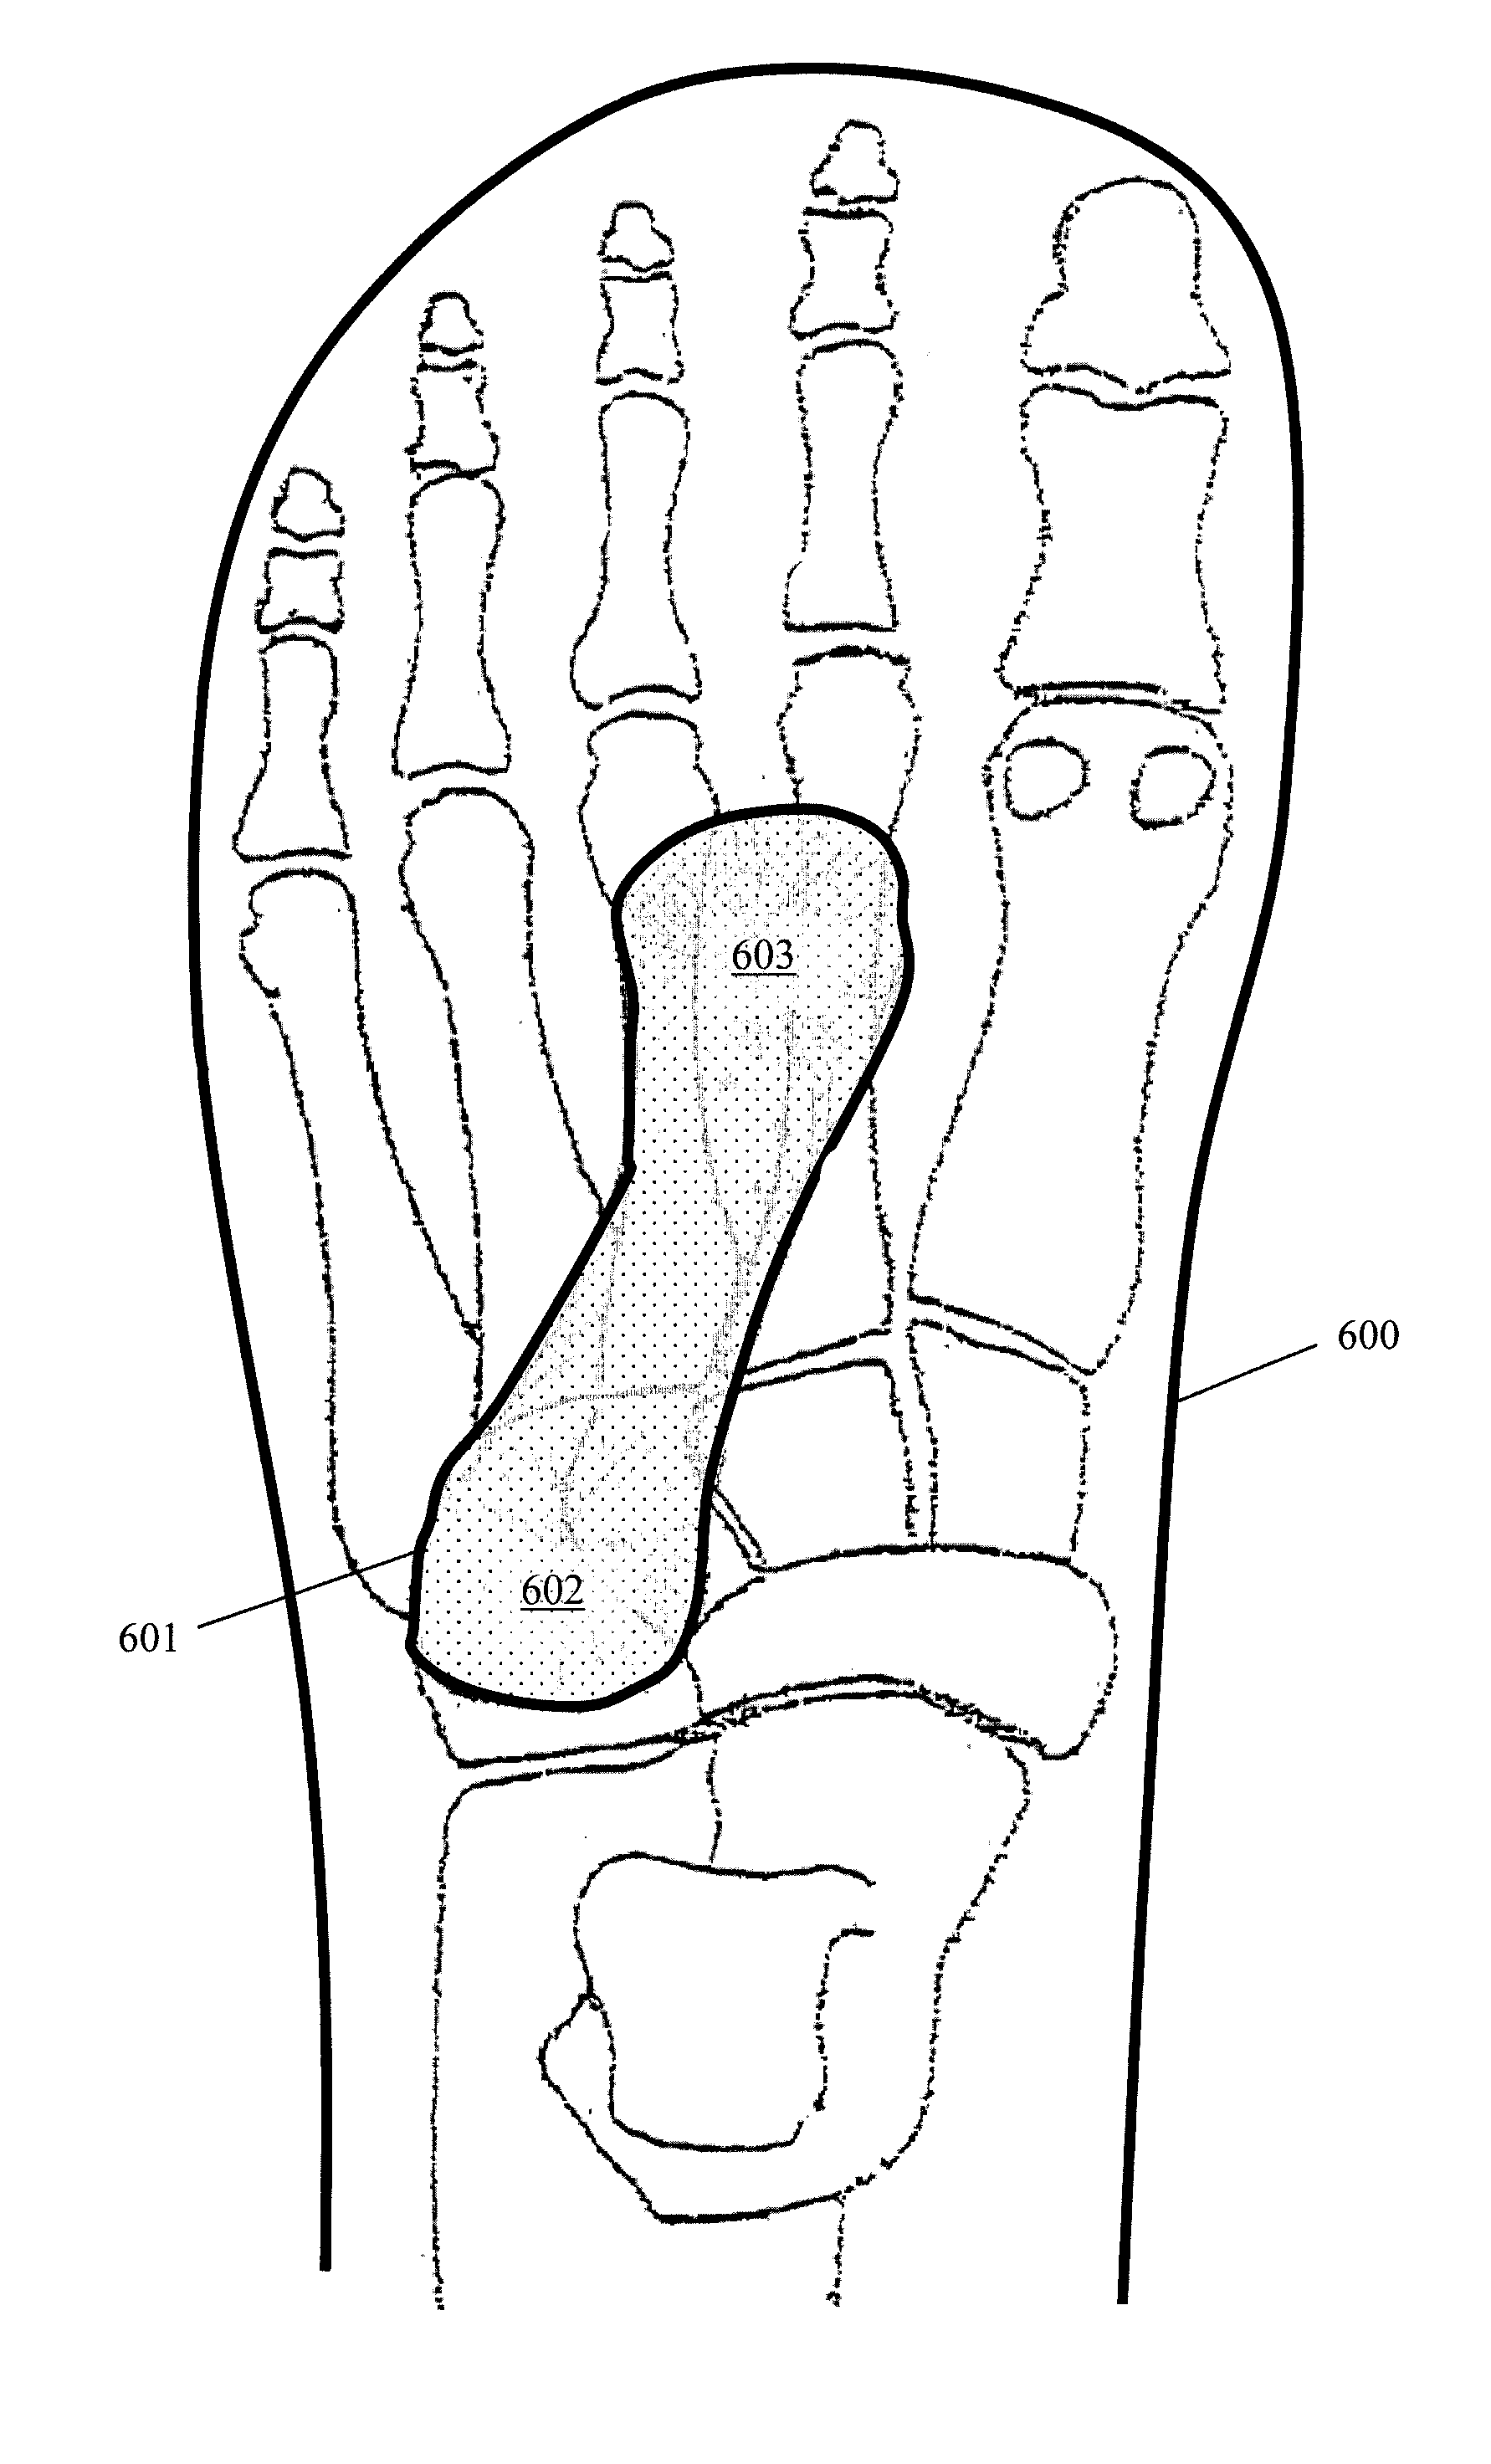 Shoe appliance with an orthopedic device